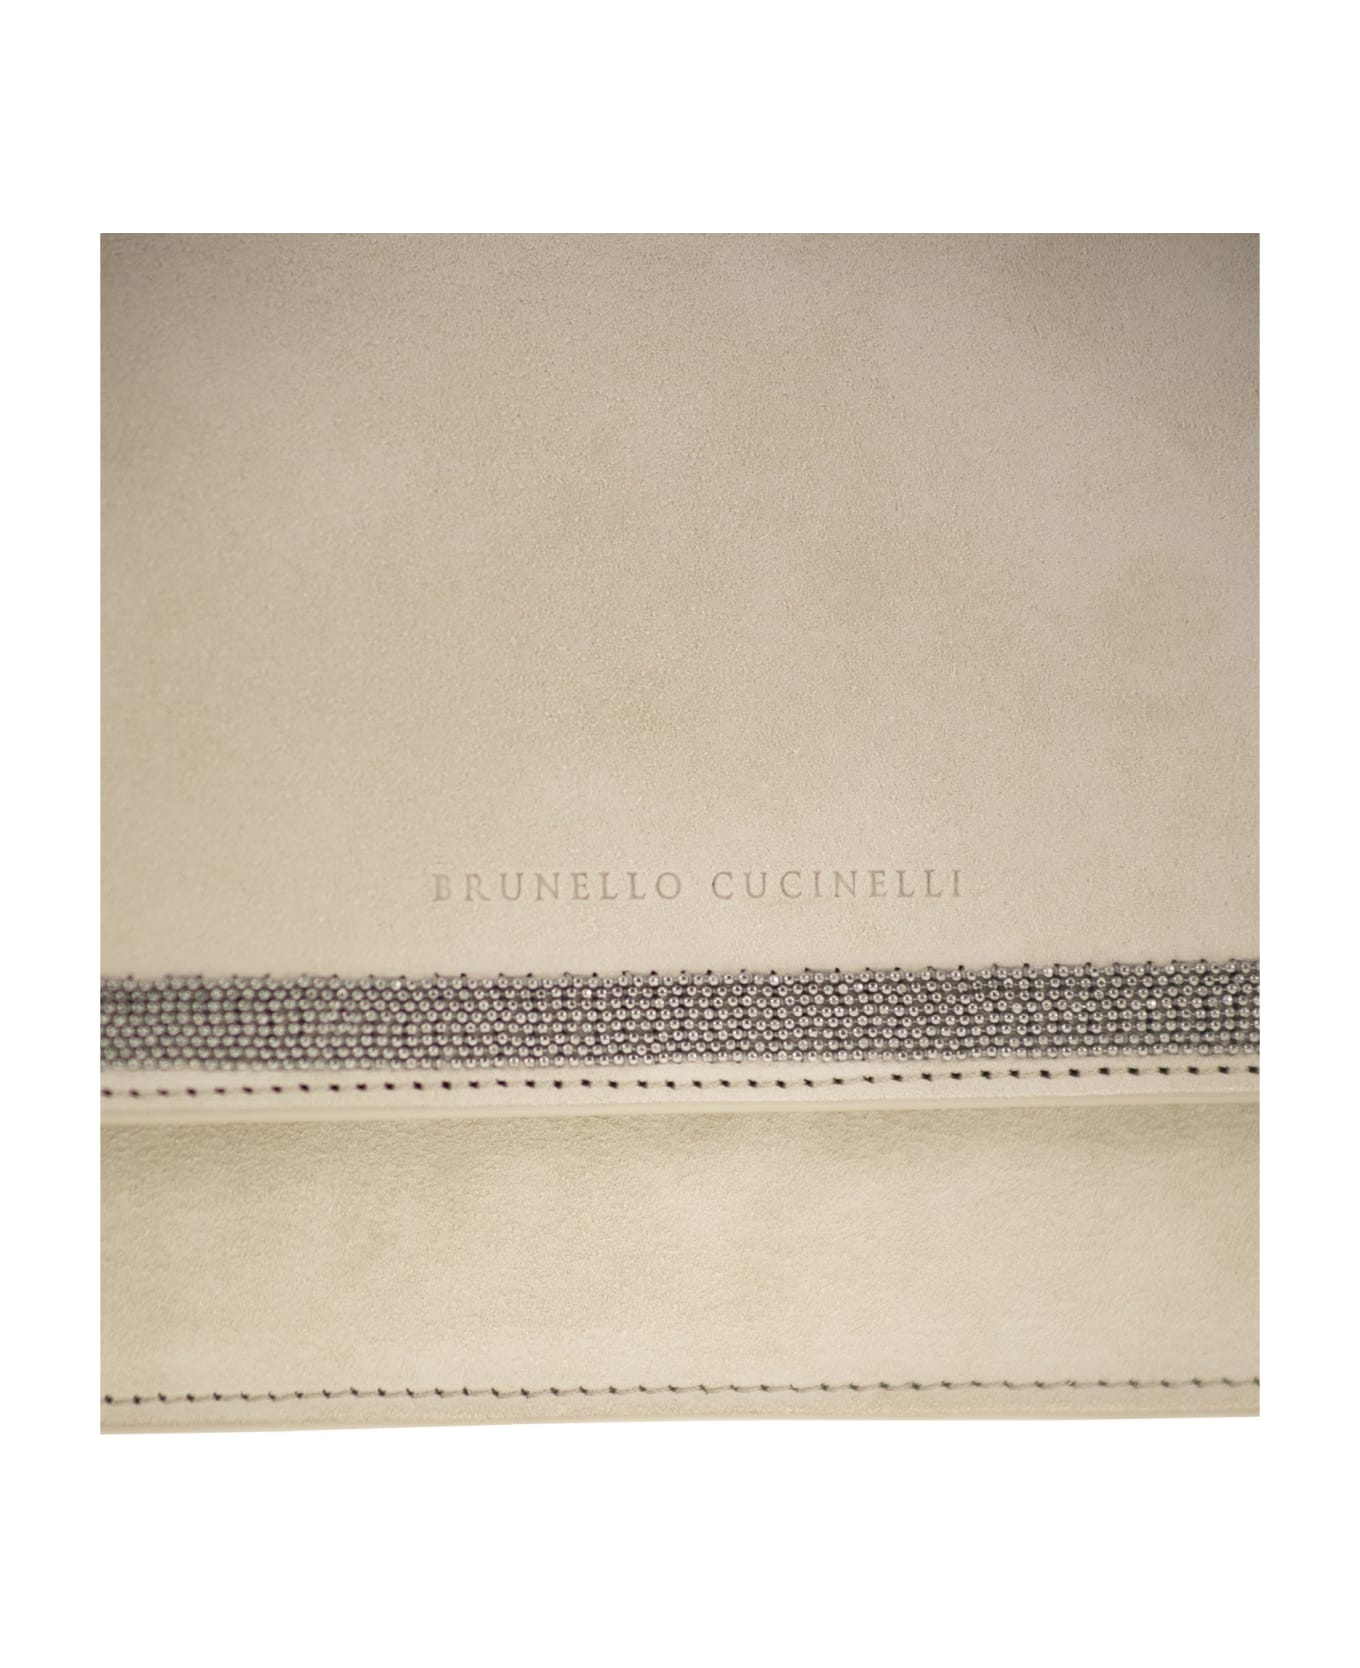 Brunello Cucinelli Suede Bag With Precious Contour - Ivory トートバッグ